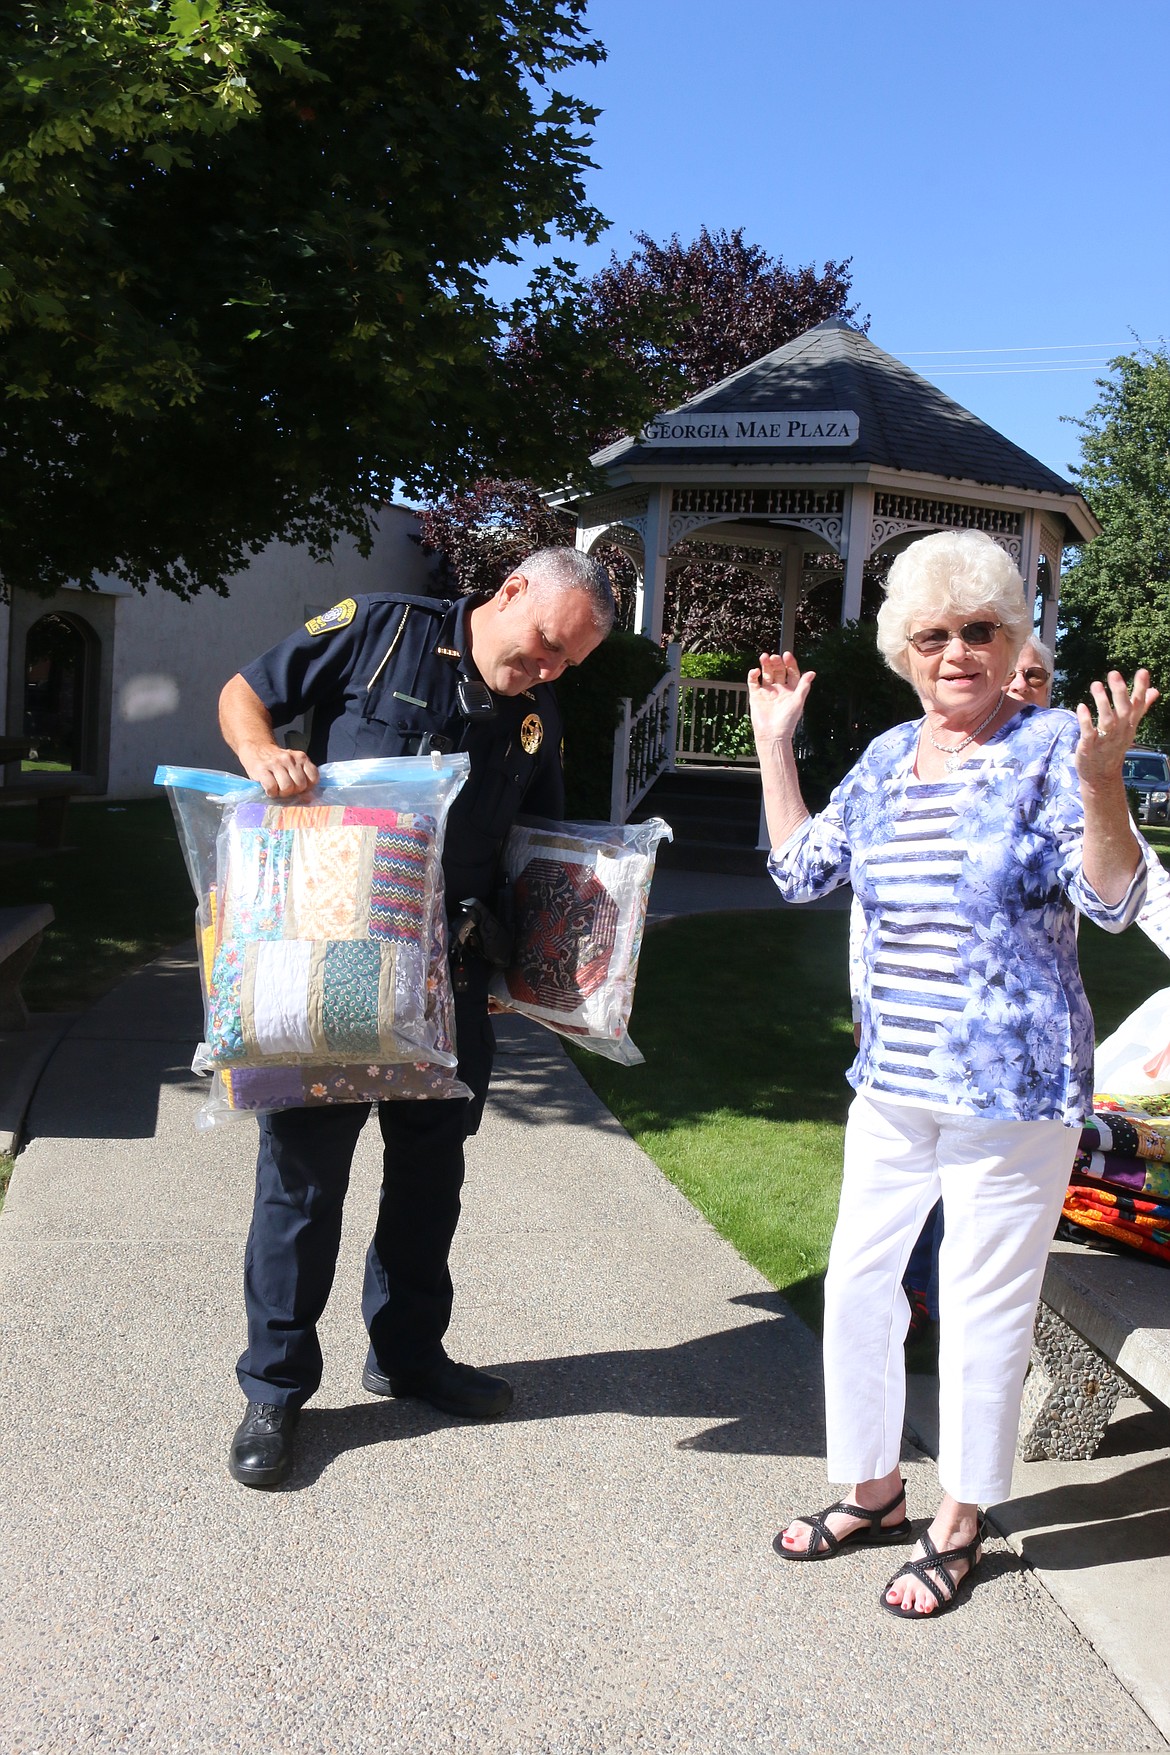 Photo by MANDI BATEMAN
Beverly Hokanson was pleased as the last of the quilts were handed out, and Bonners Ferry Police Chief Zimmerman admired them.